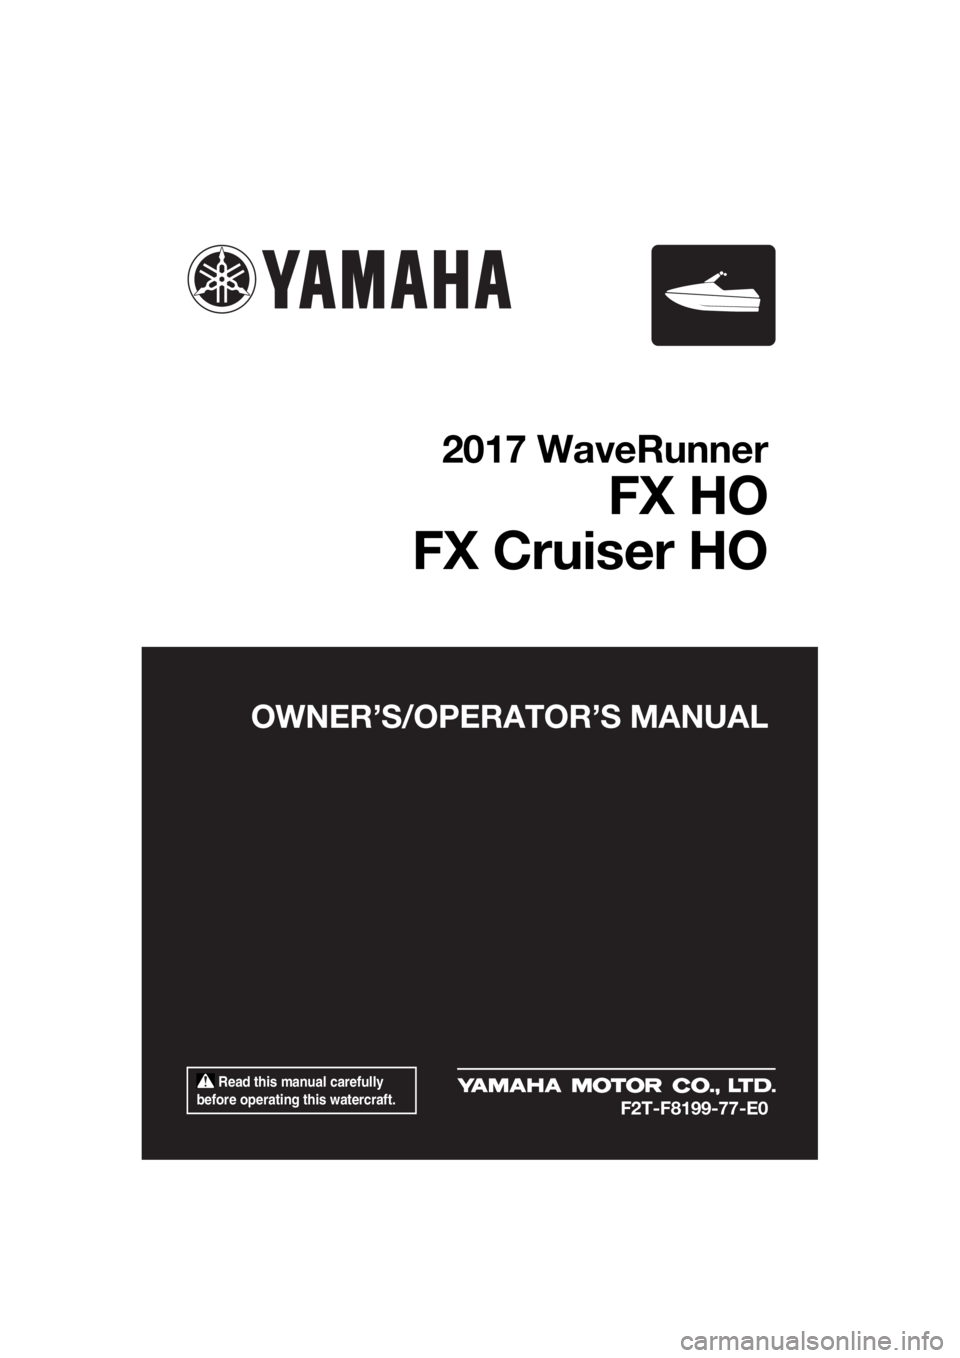 YAMAHA FX HO CRUISER 2017  Owners Manual  Read this manual carefully 
before operating this watercraft.
OWNER’S/OPERATOR’S MANUAL
2017 WaveRunner
FX HO
FX Cruiser HO
F2T-F8199-77-E0
UF2T77E0.book  Page 1  Monday, July 11, 2016  9:31 AM 